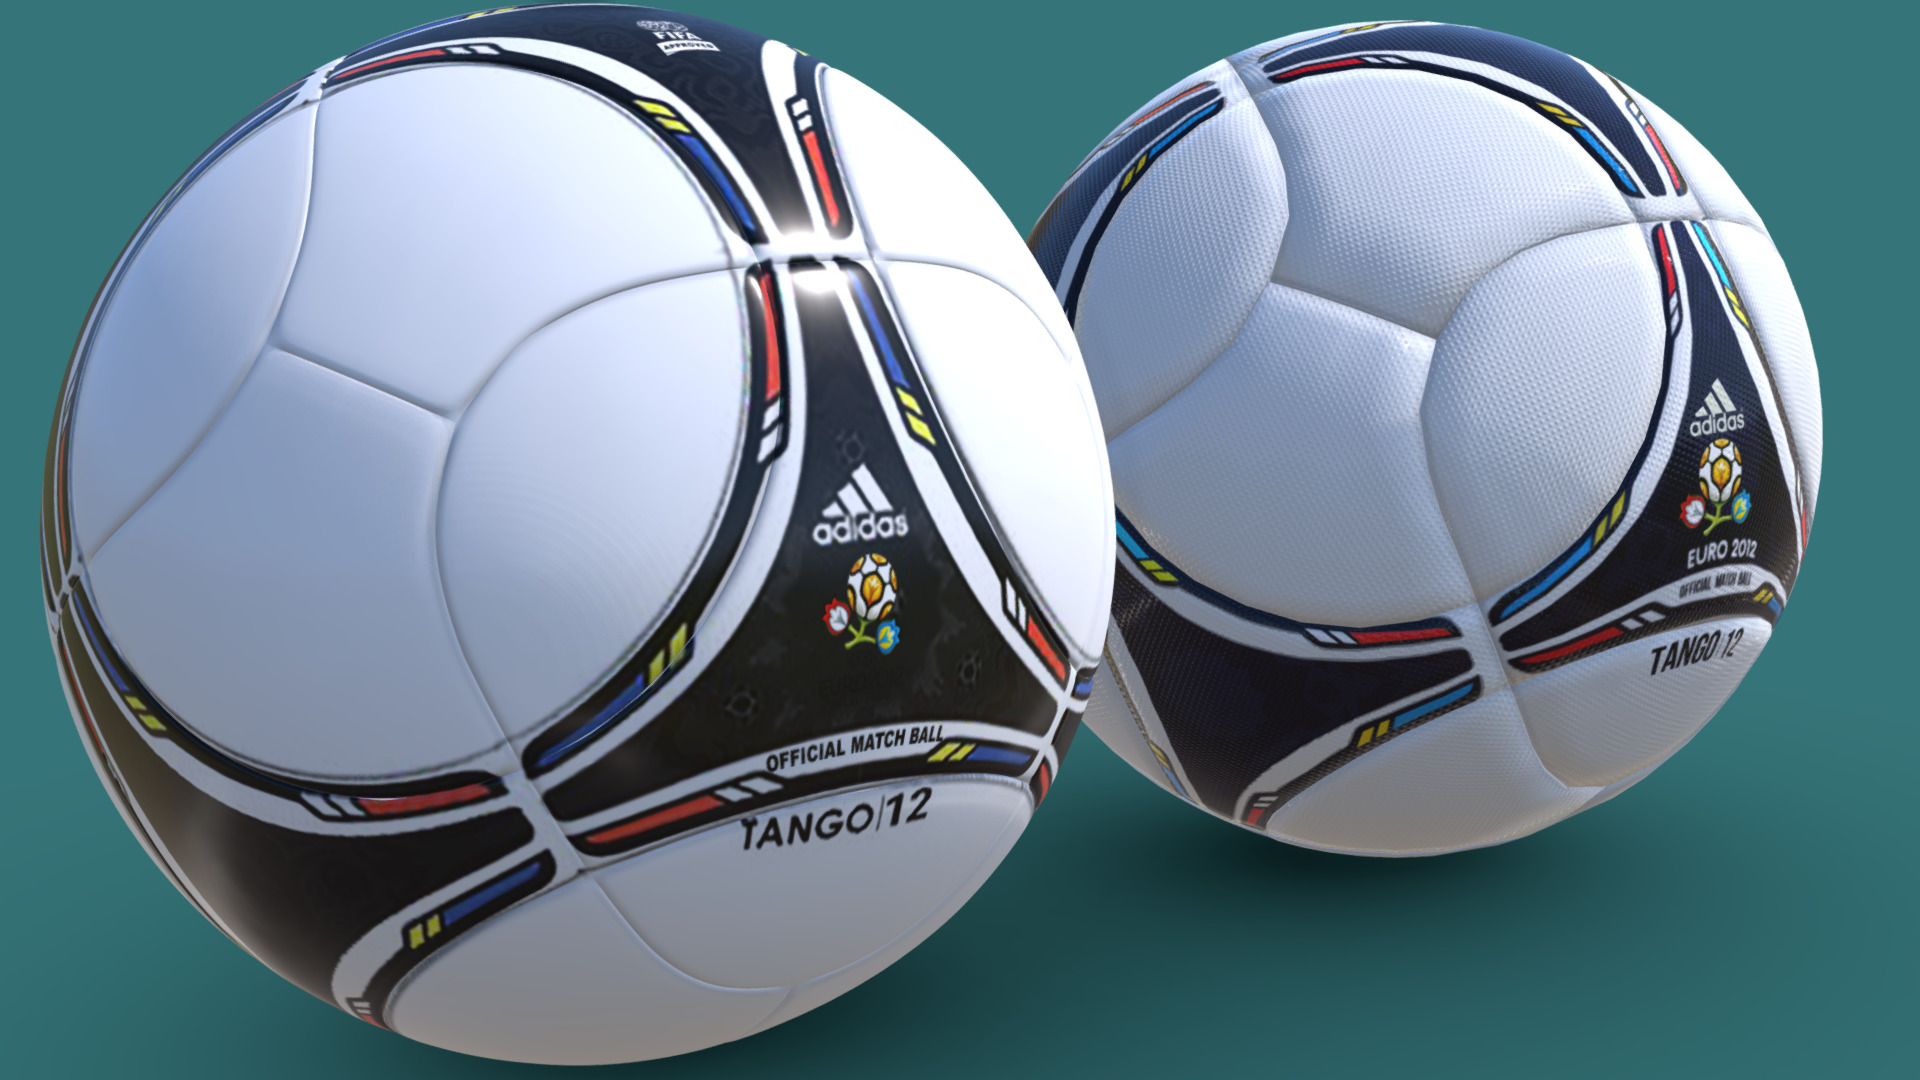 3D model 2012 Eurocup Tango 12 Ball - This is a 3D model of the 2012 Eurocup Tango 12 Ball. The 3D model is about a pair of white and black helmets.